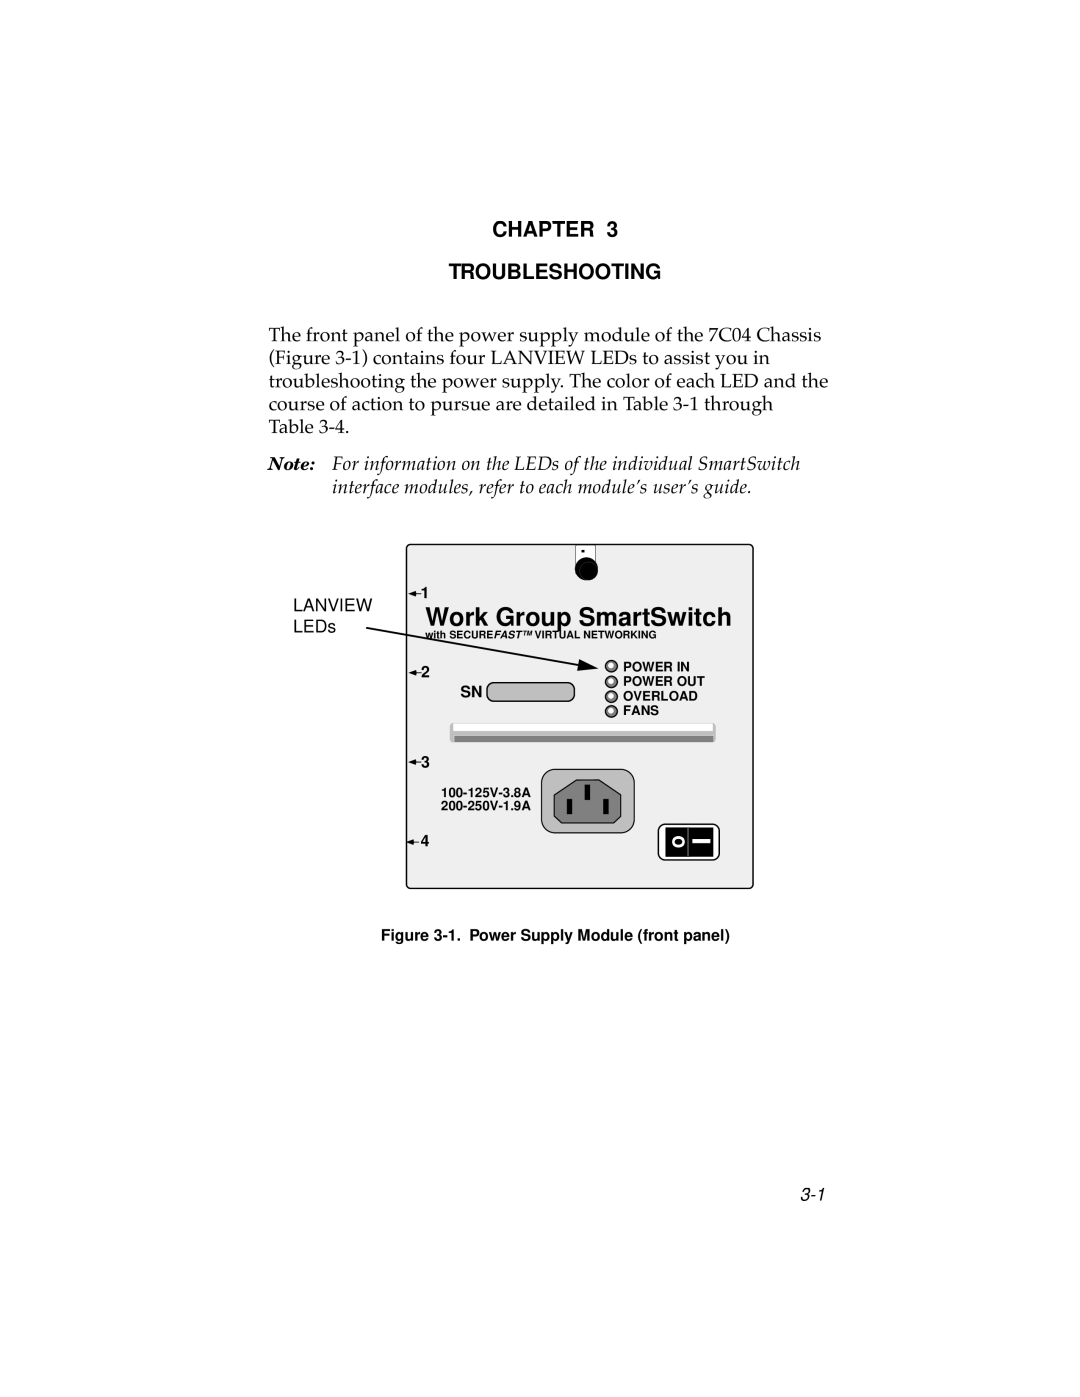 Cabletron Systems 7C04 Workgroup manual LEDsWork Group SmartSwitch, Chapter Troubleshooting 